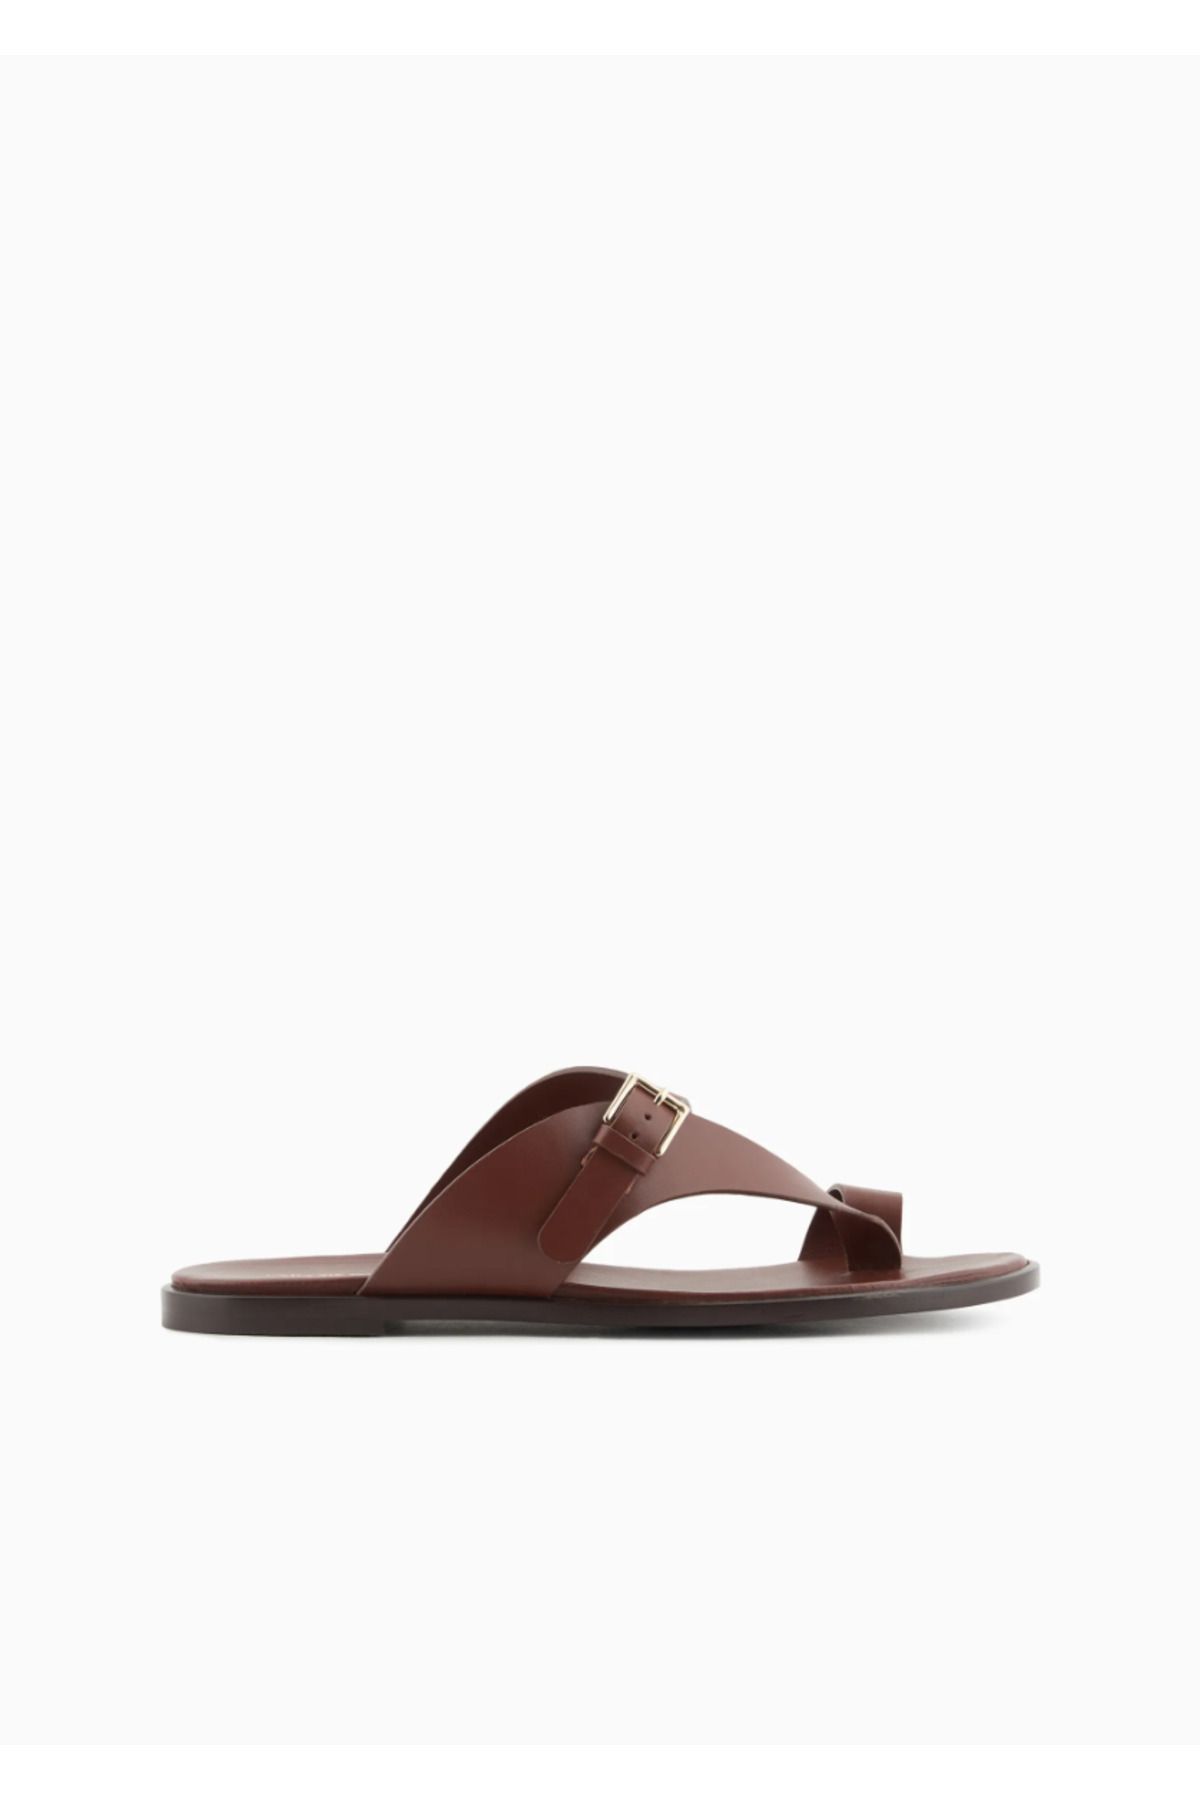 Emporio Armani Leather Flip-flop Sandals With Buckle